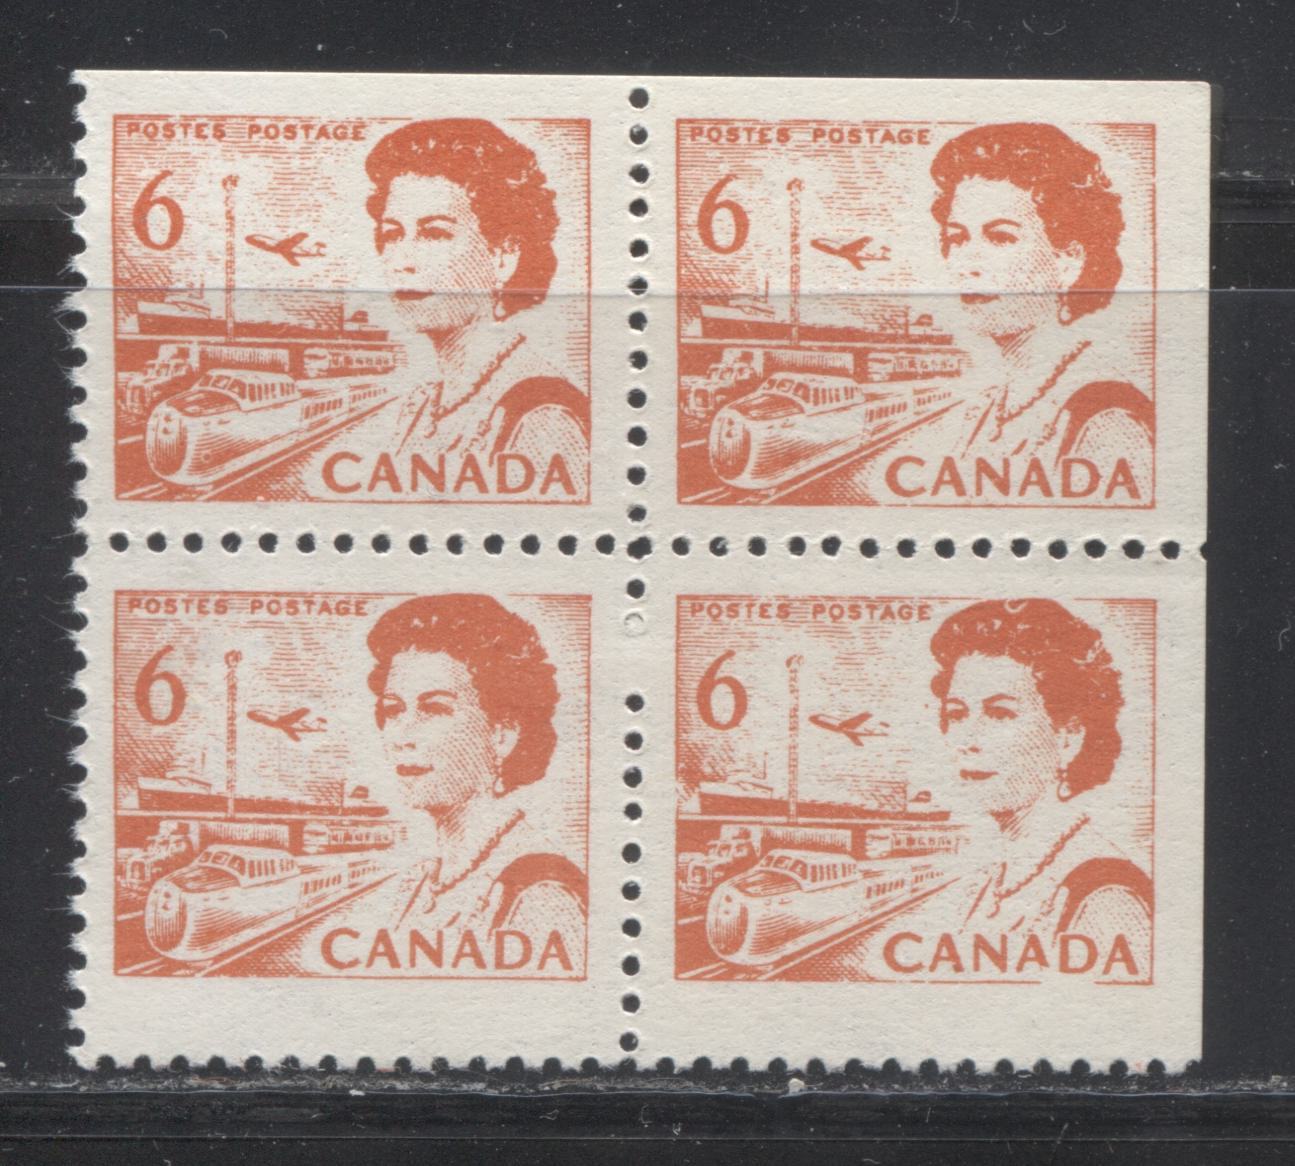 Lot 179 Canada #459bF 6c Orange Transportation, 1967-1973 Centennial Definitive Issue, A VFNH UR Corner Block of the Lithographed Postal Forgery